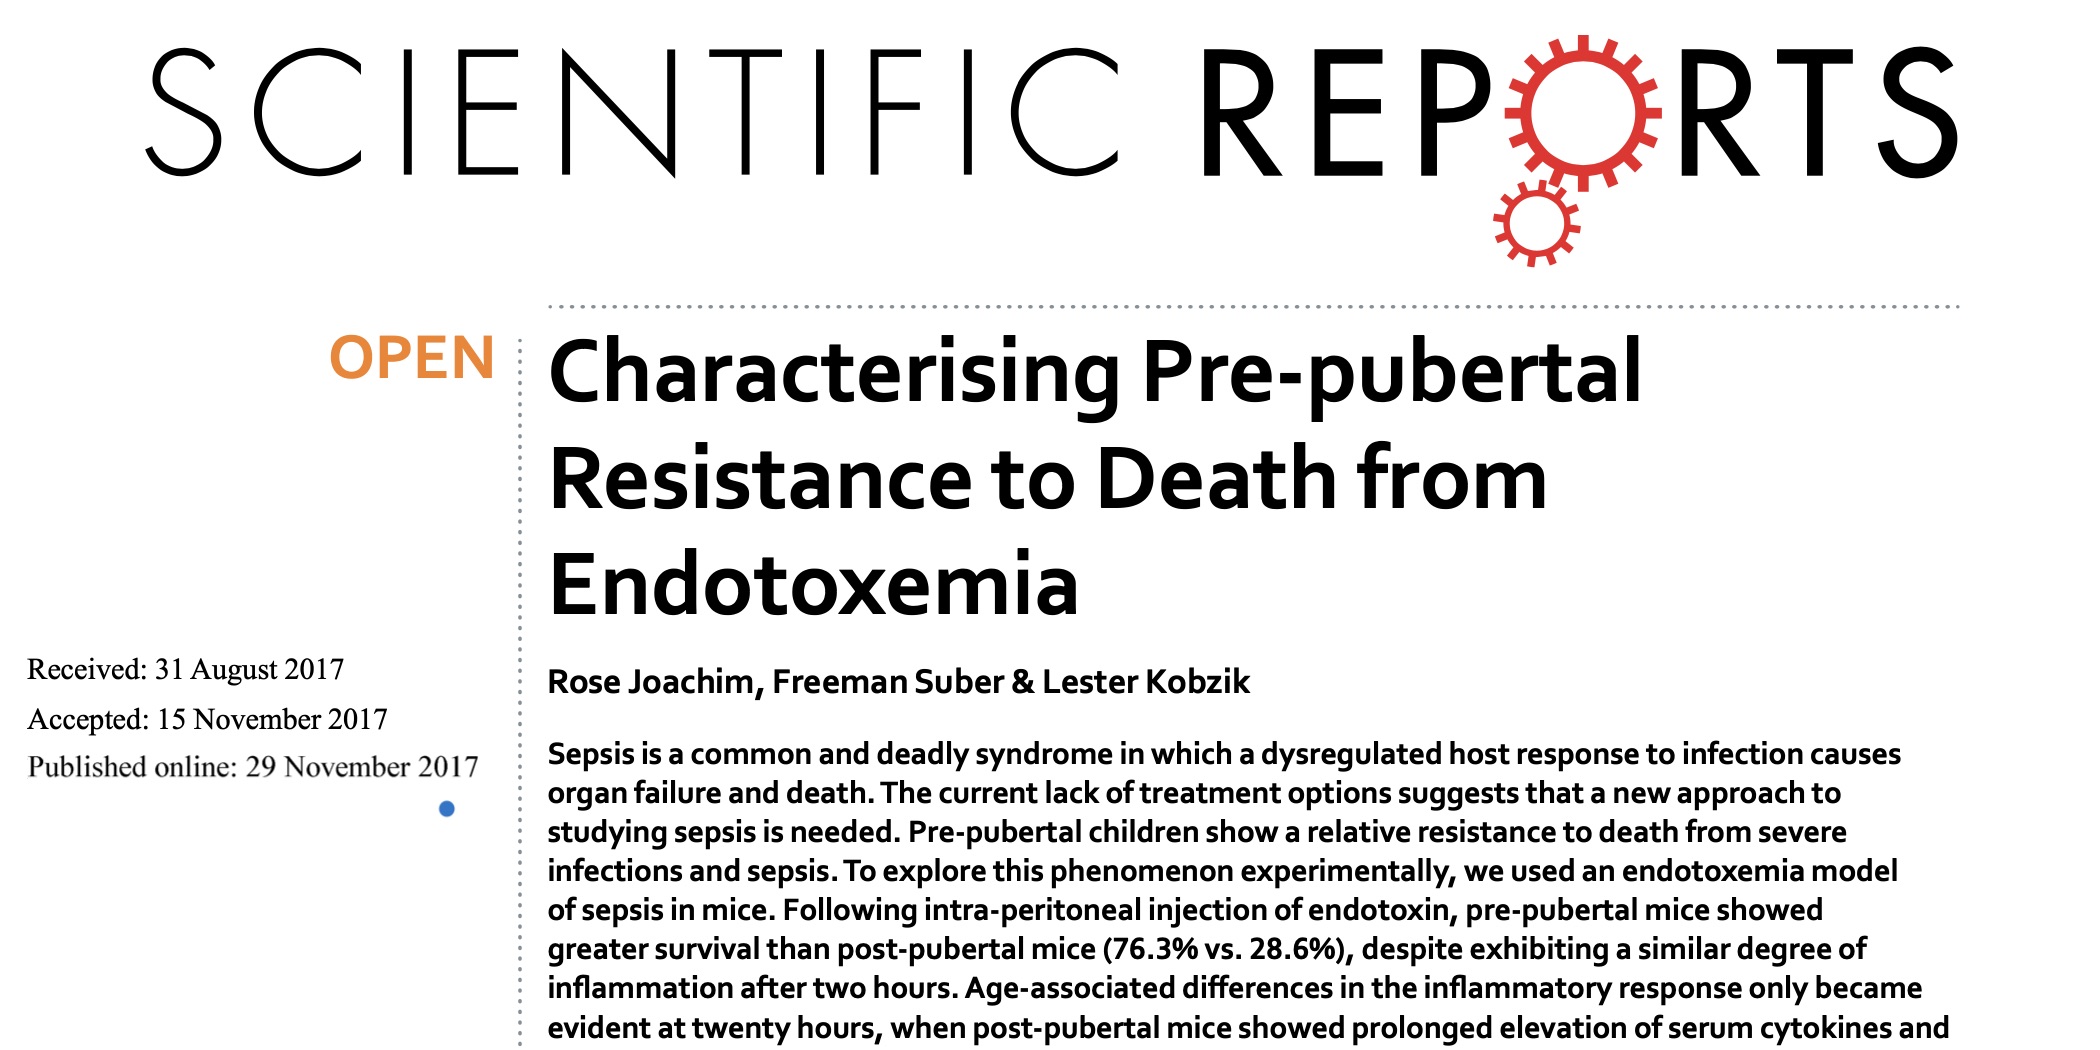 Characterising Pre-pubertal Resistance to Death from Endotoxemia